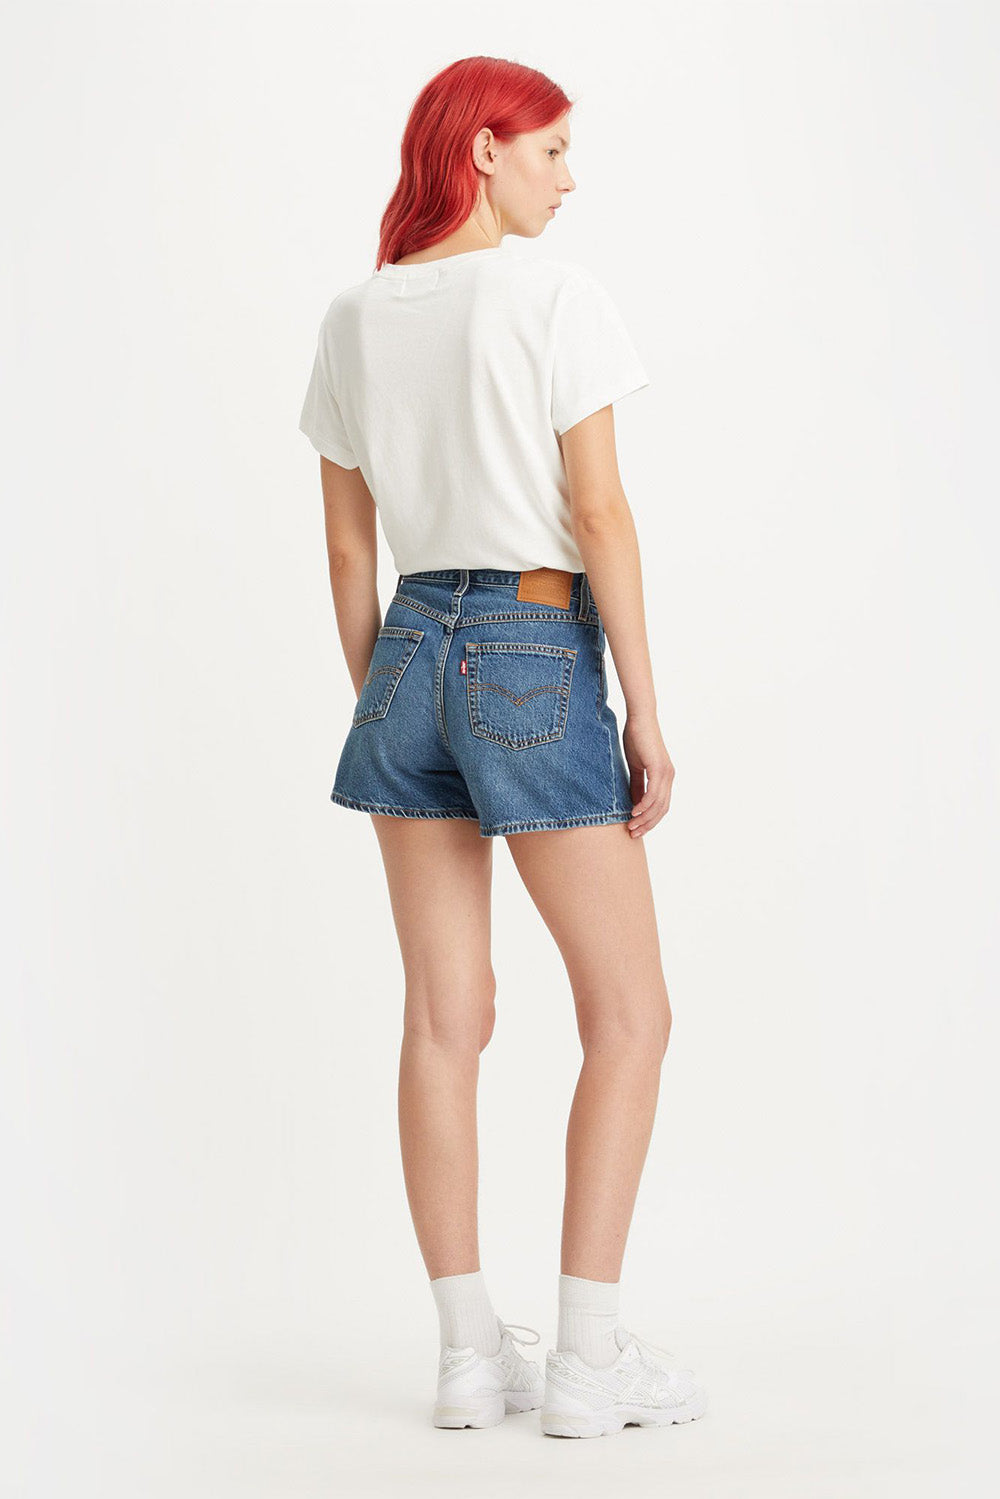 Levis - 80s Mom Short - You Sure Can - Back